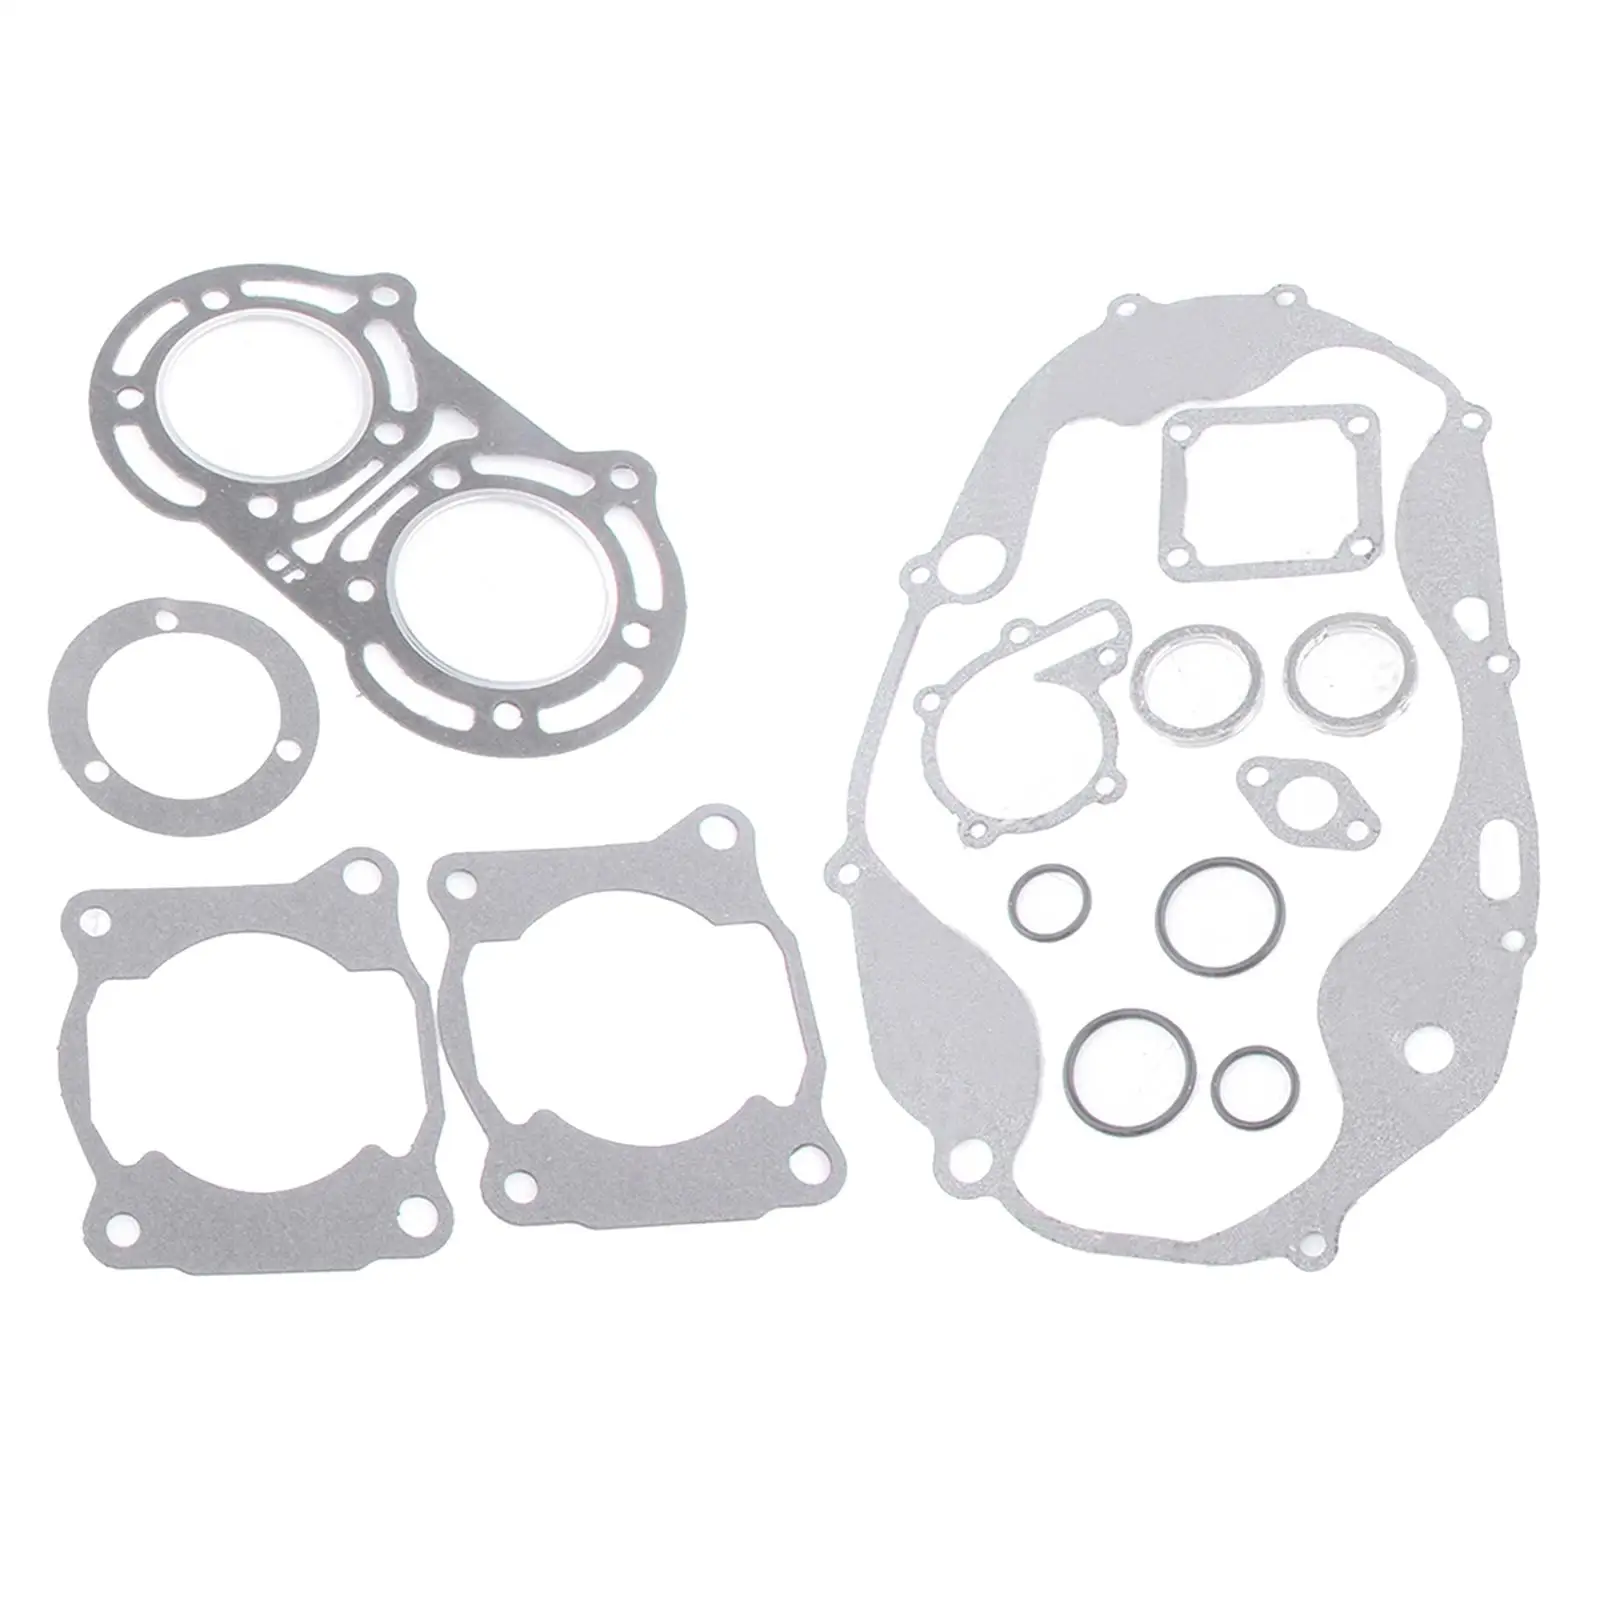 New Replacement   Engine Gasket, Full Set, for ATV YFZ350, Banshee 350 87-06 GS34